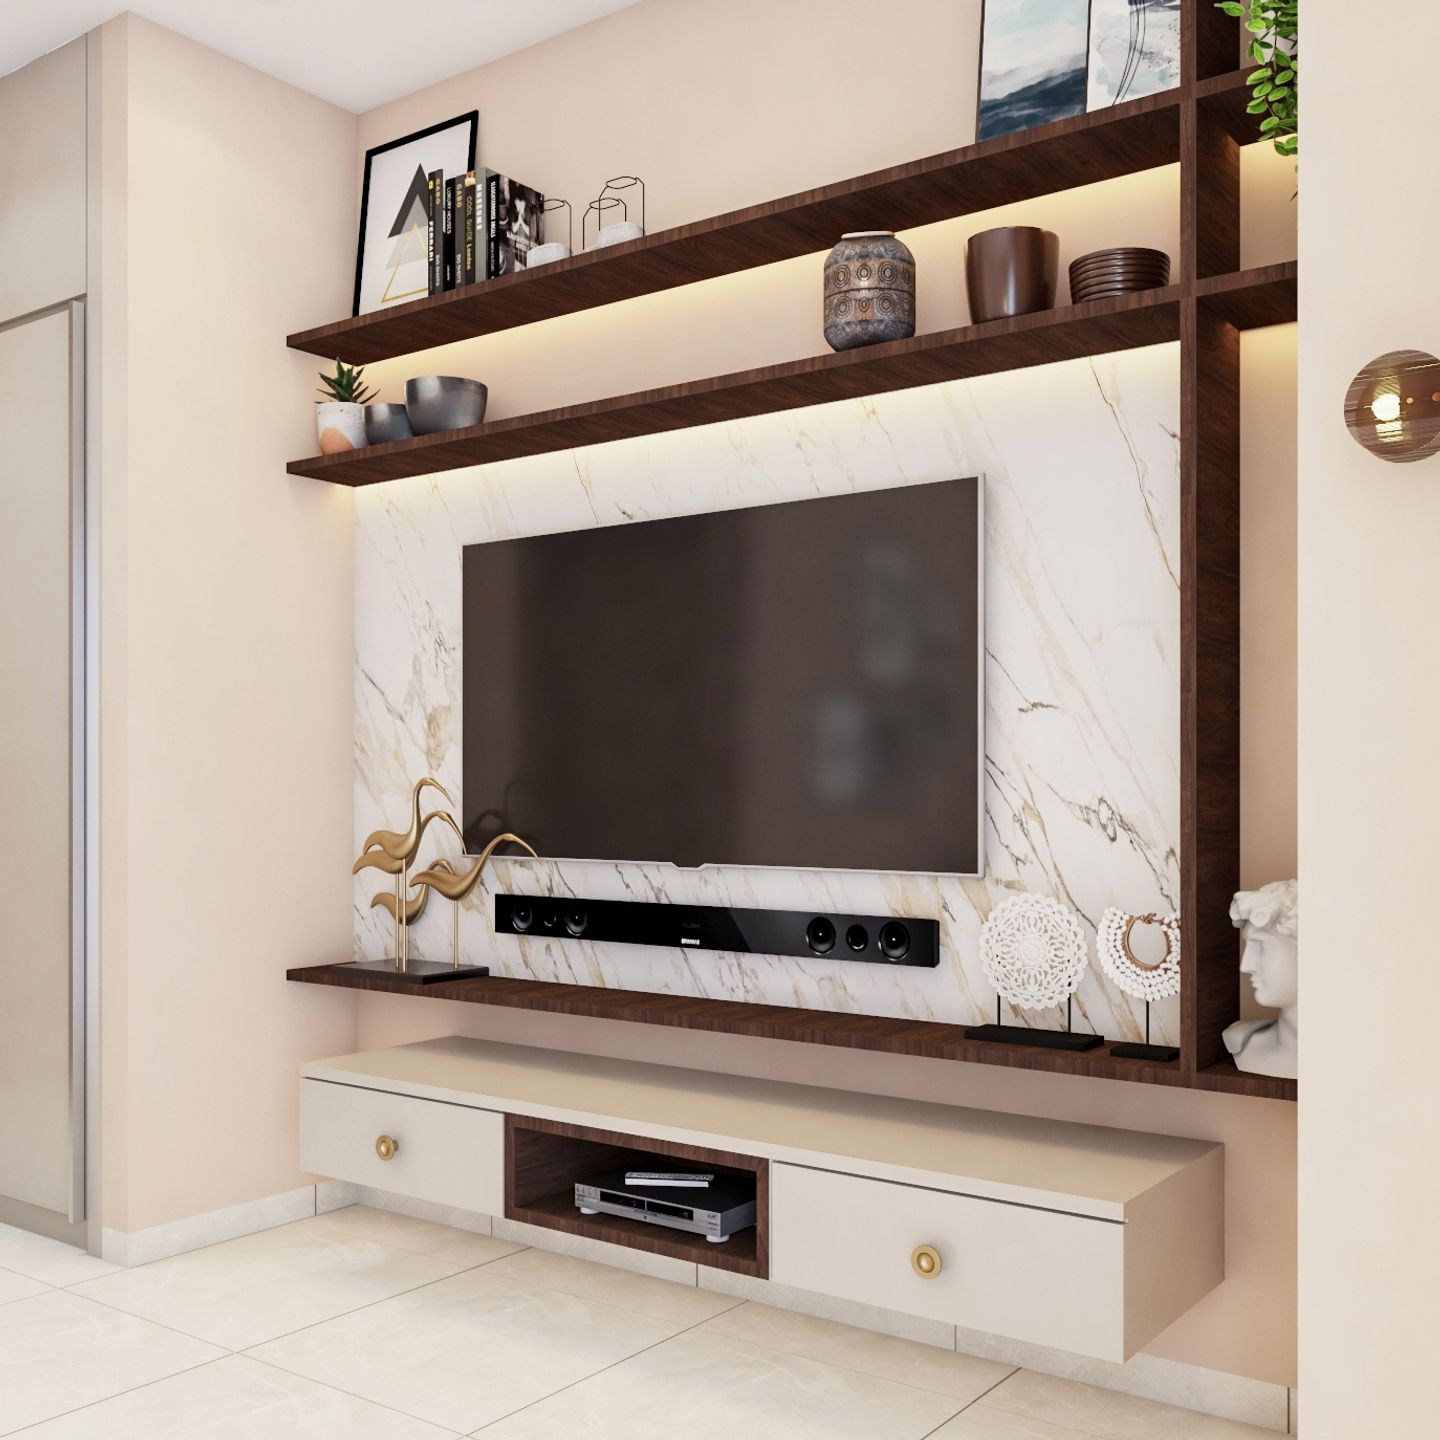 White And Brown TV Unit Design With Open Ledges - Livspace